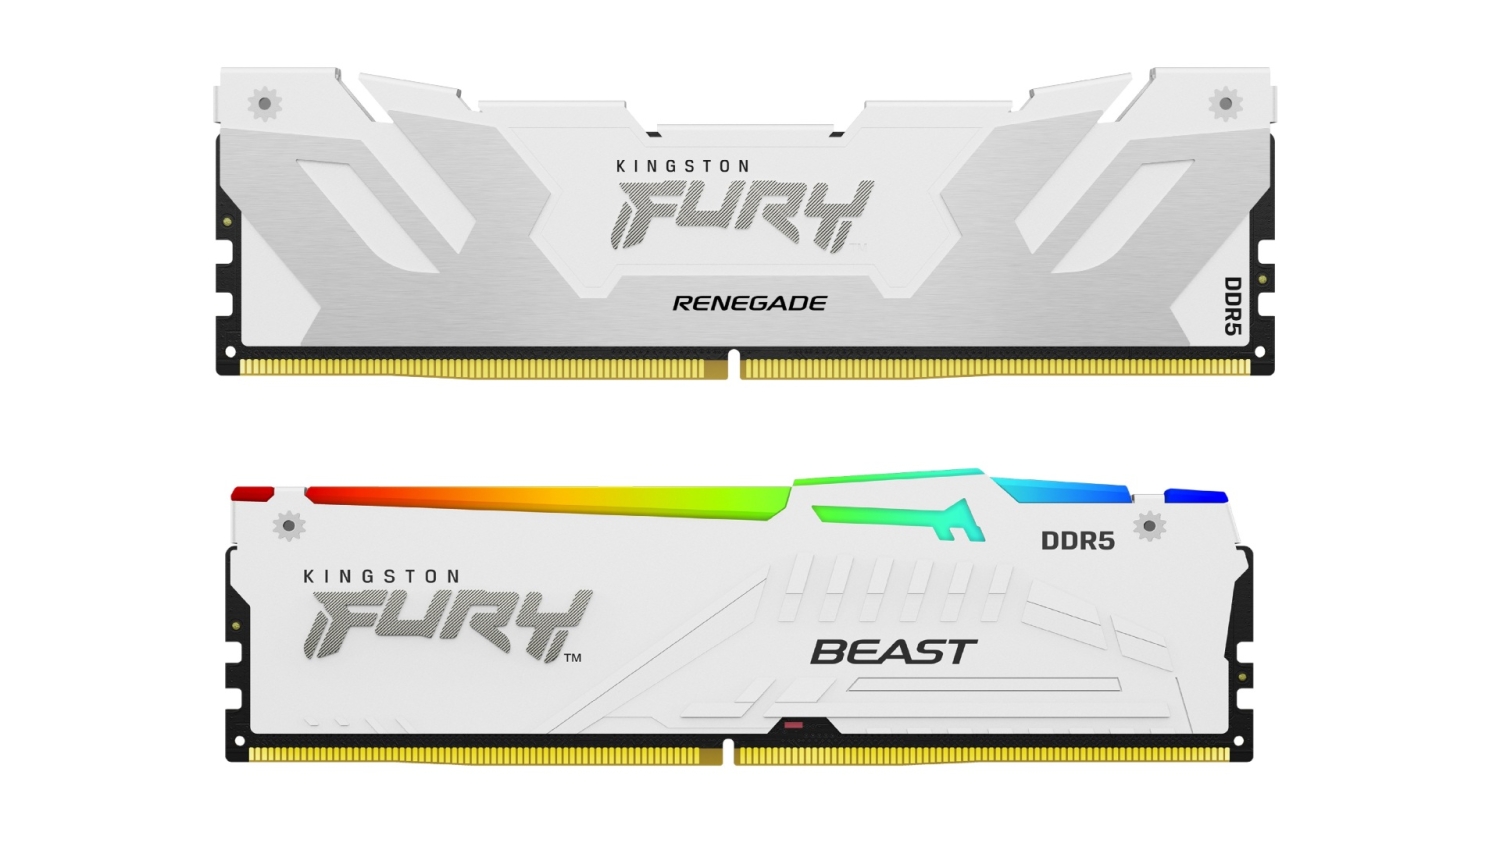 Kingston FURY expands its DDR5 lineup with new white high-speed